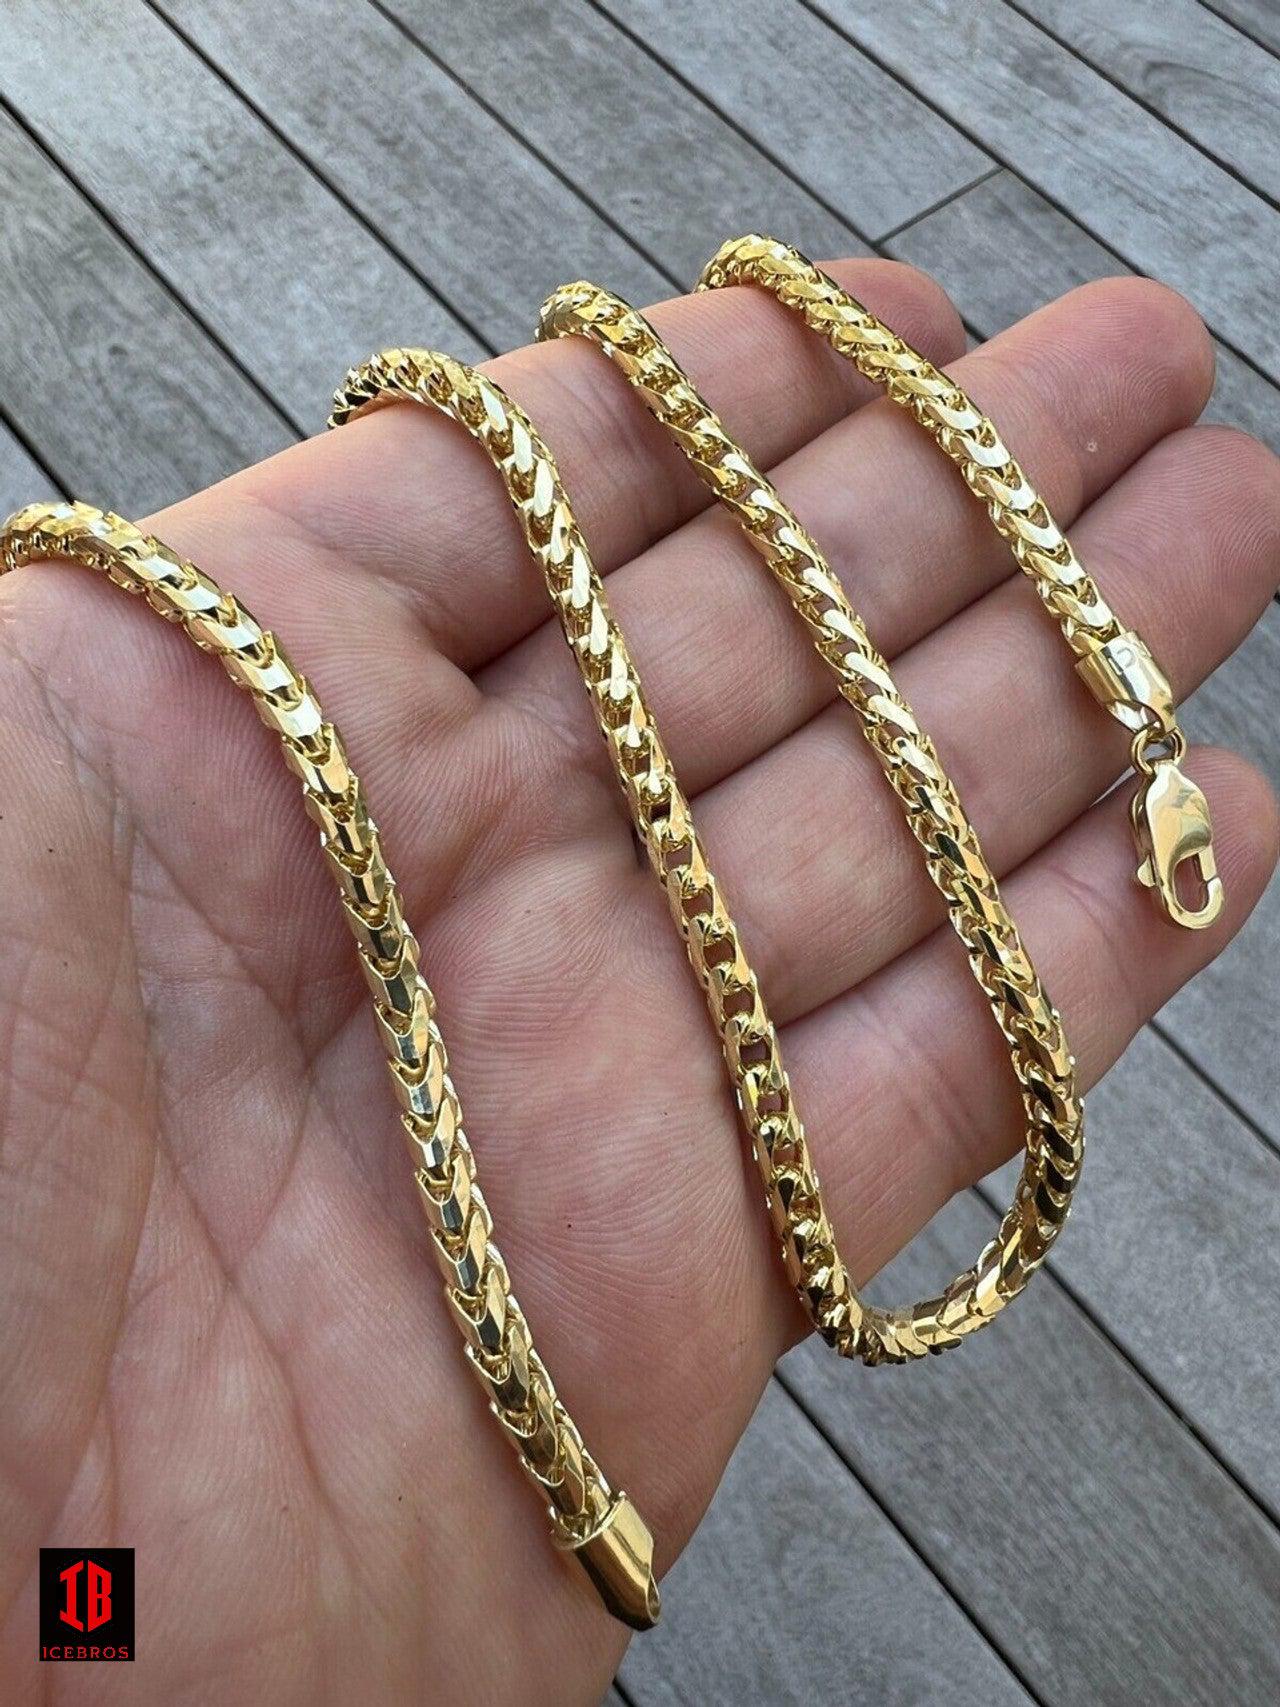 14k Genuine Solid Yellow Gold Franco Chain Or Bracelet 2mm - 5mm Necklace 8''-30"